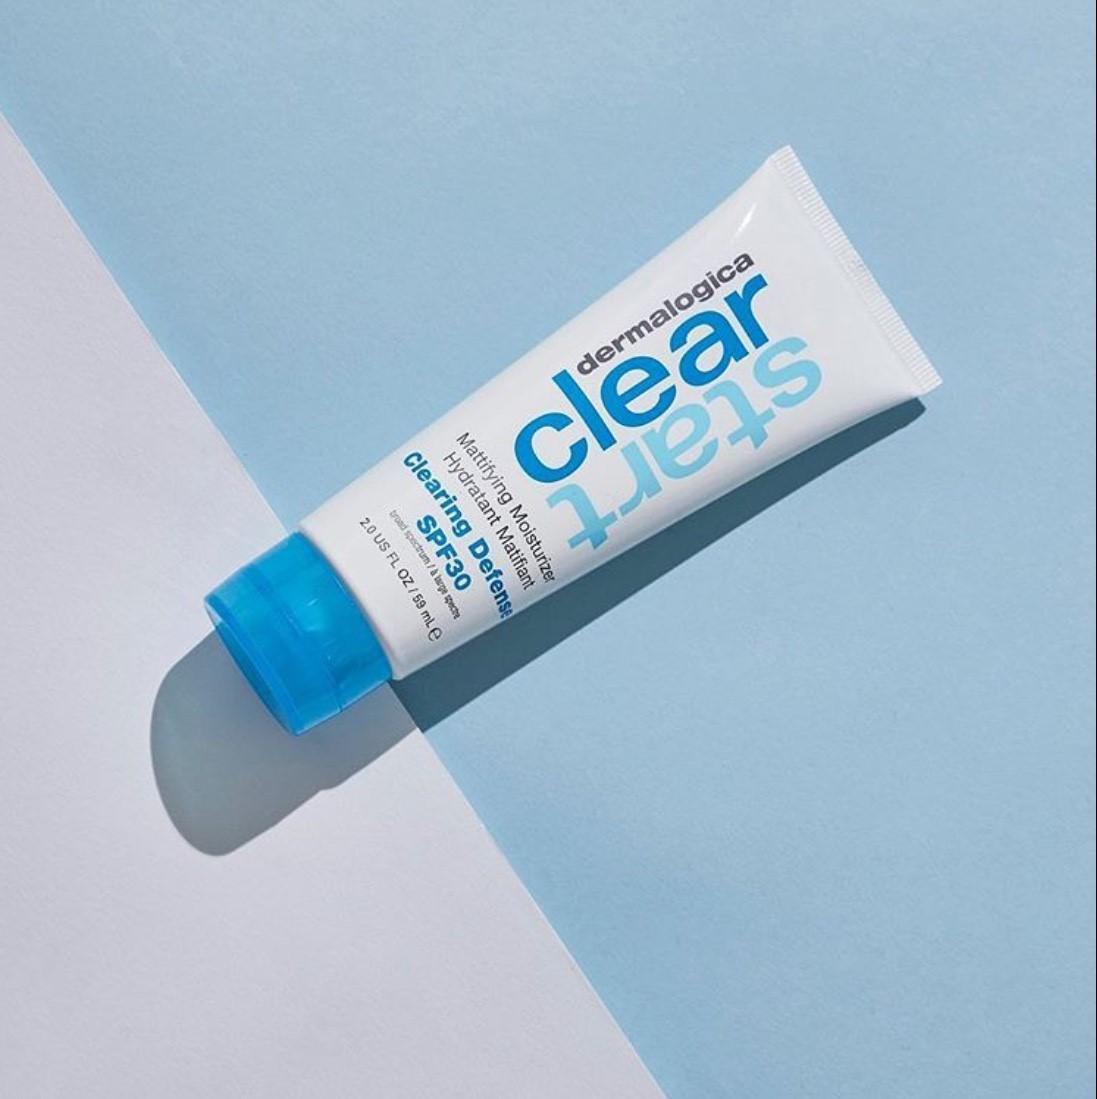 NEW Clear Start Clearing Defense SPF30.